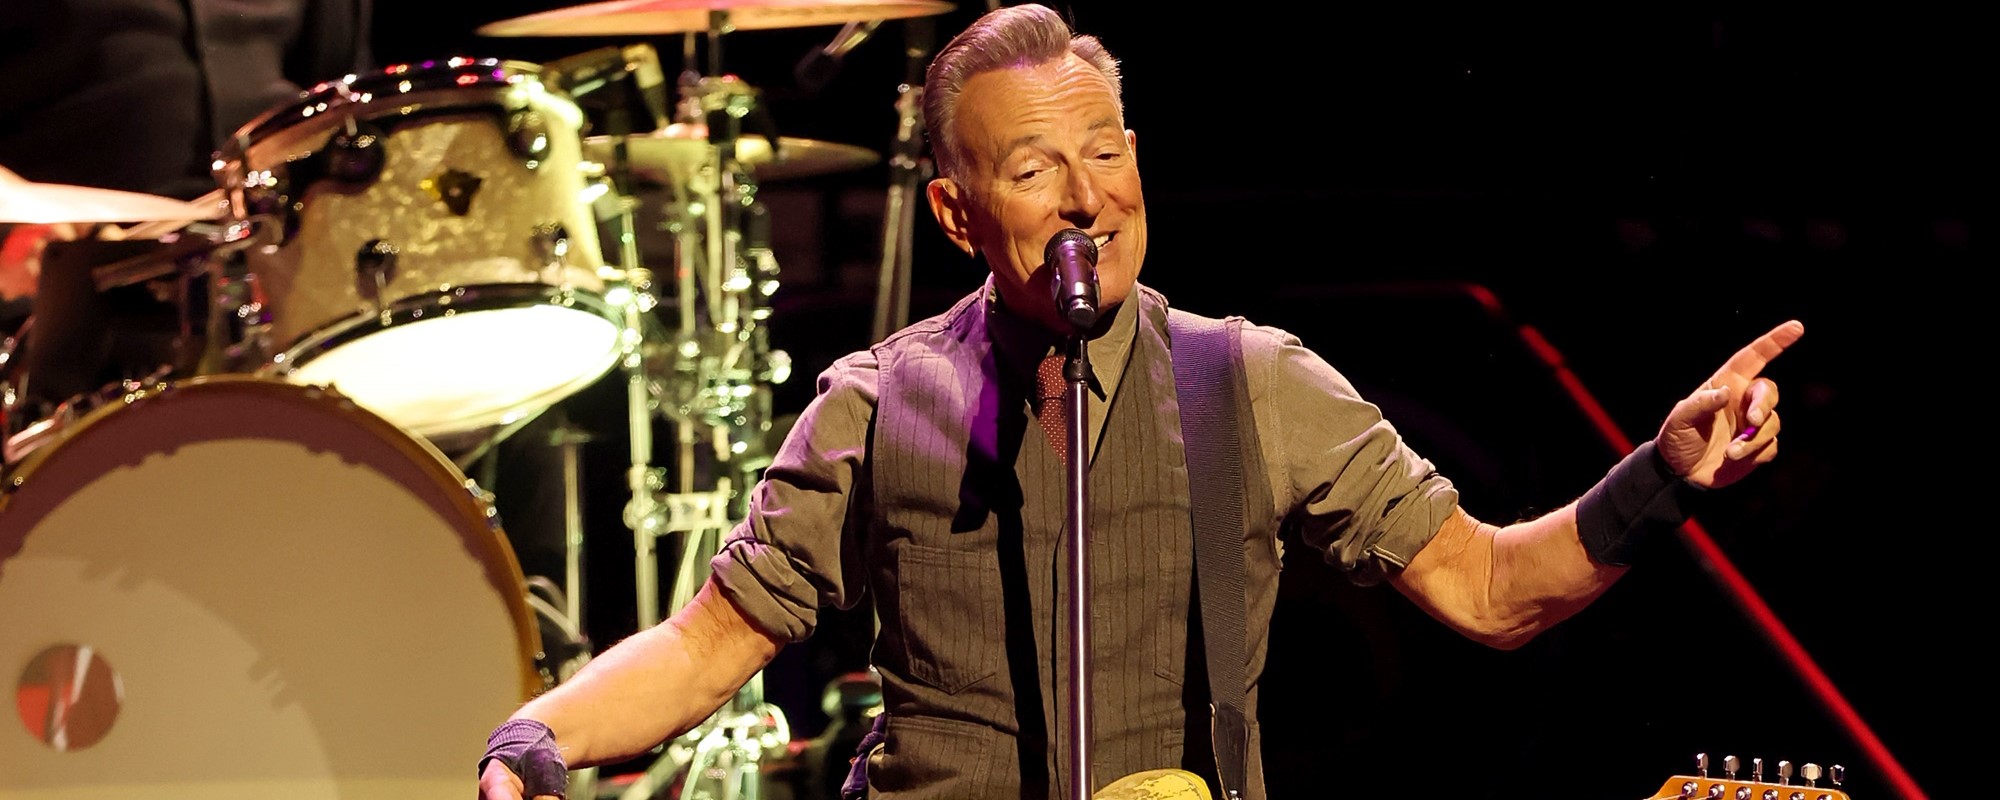 Bruce Springsteen Thanks U.S. Audiences, Playfully Warns European Fans, “We’re Coming to Get Ya!”